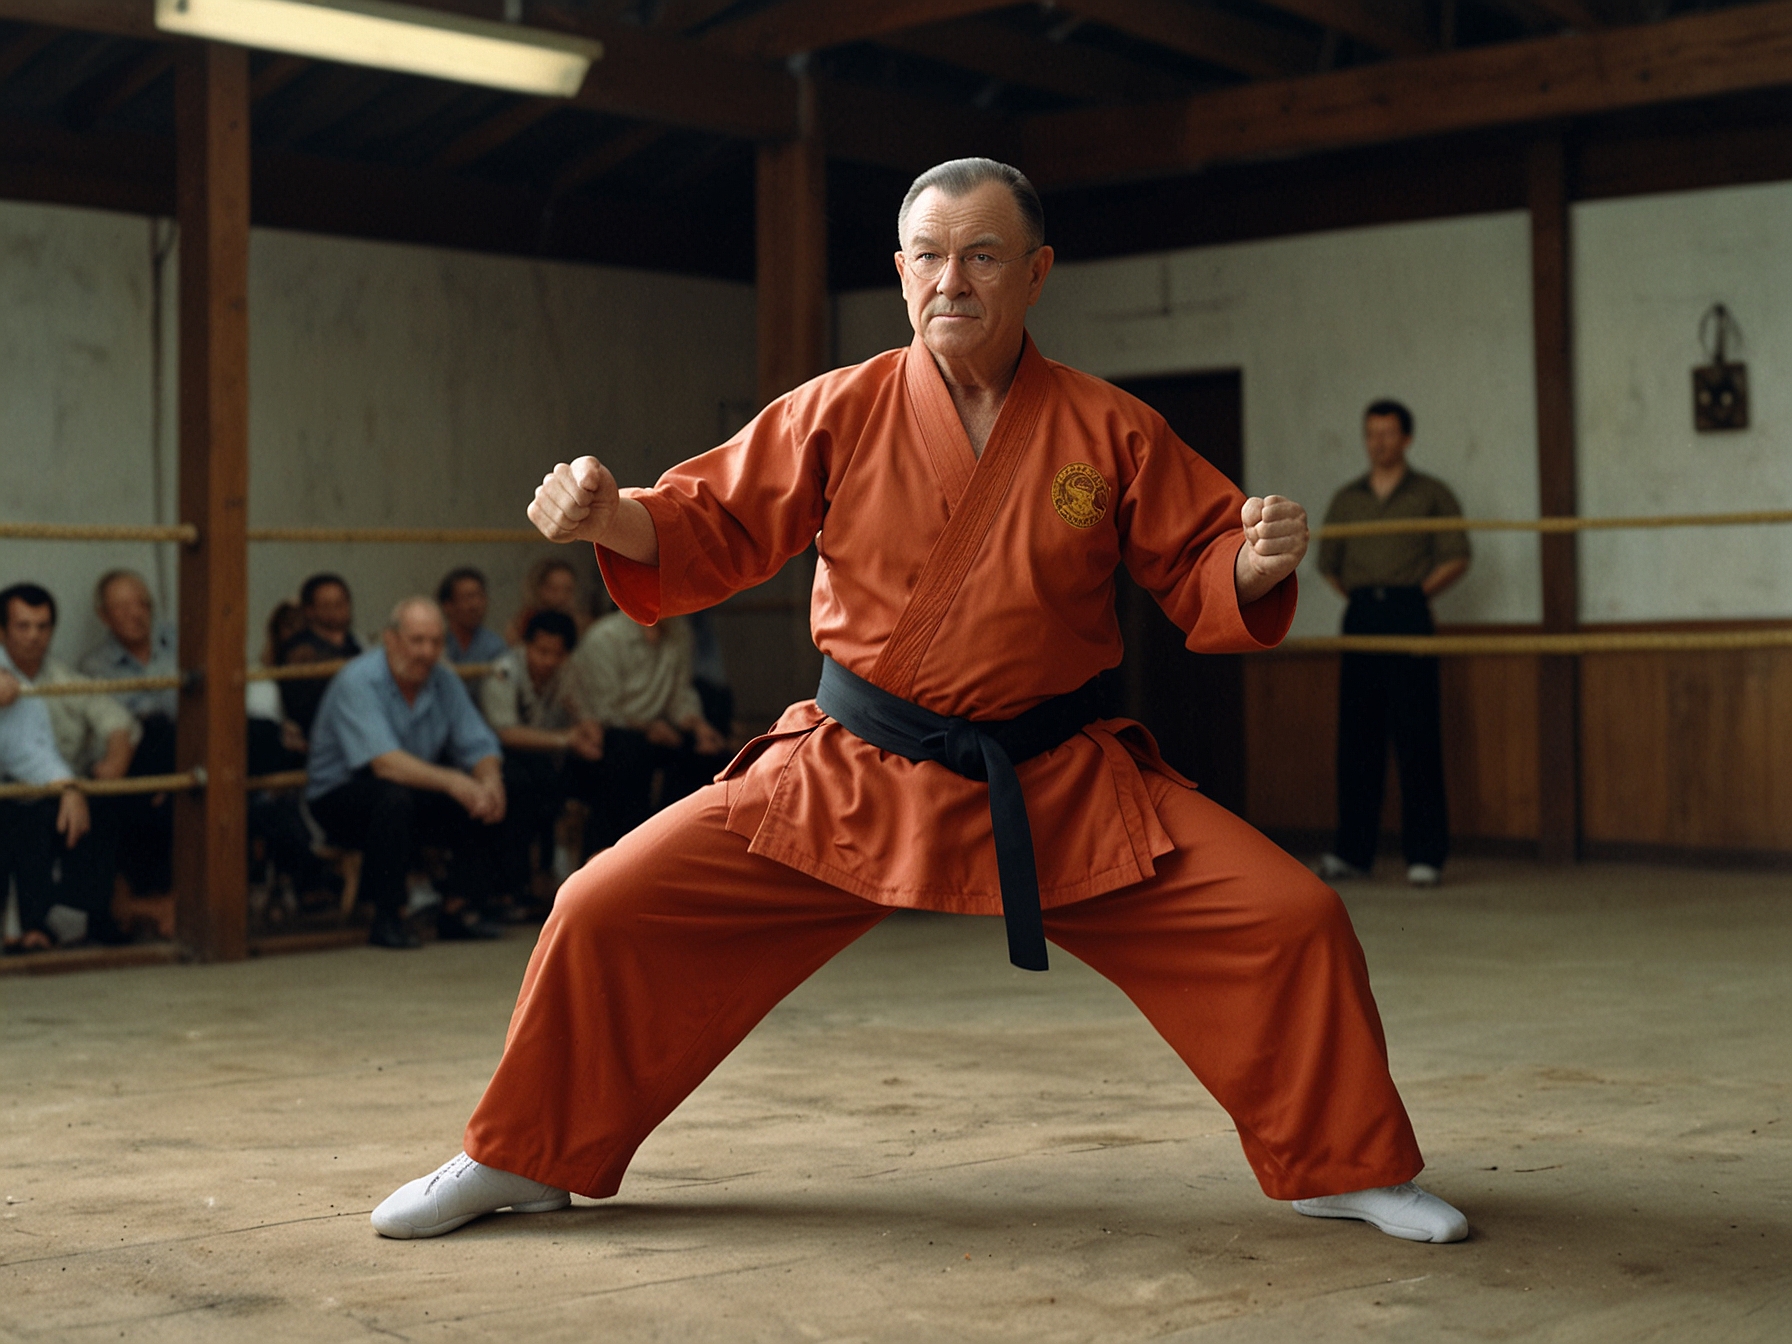 A promotional still from 'Big Stan' showing Stan Minton, the main character, practicing martial arts under the guidance of his quirky and flamboyant martial arts guru.